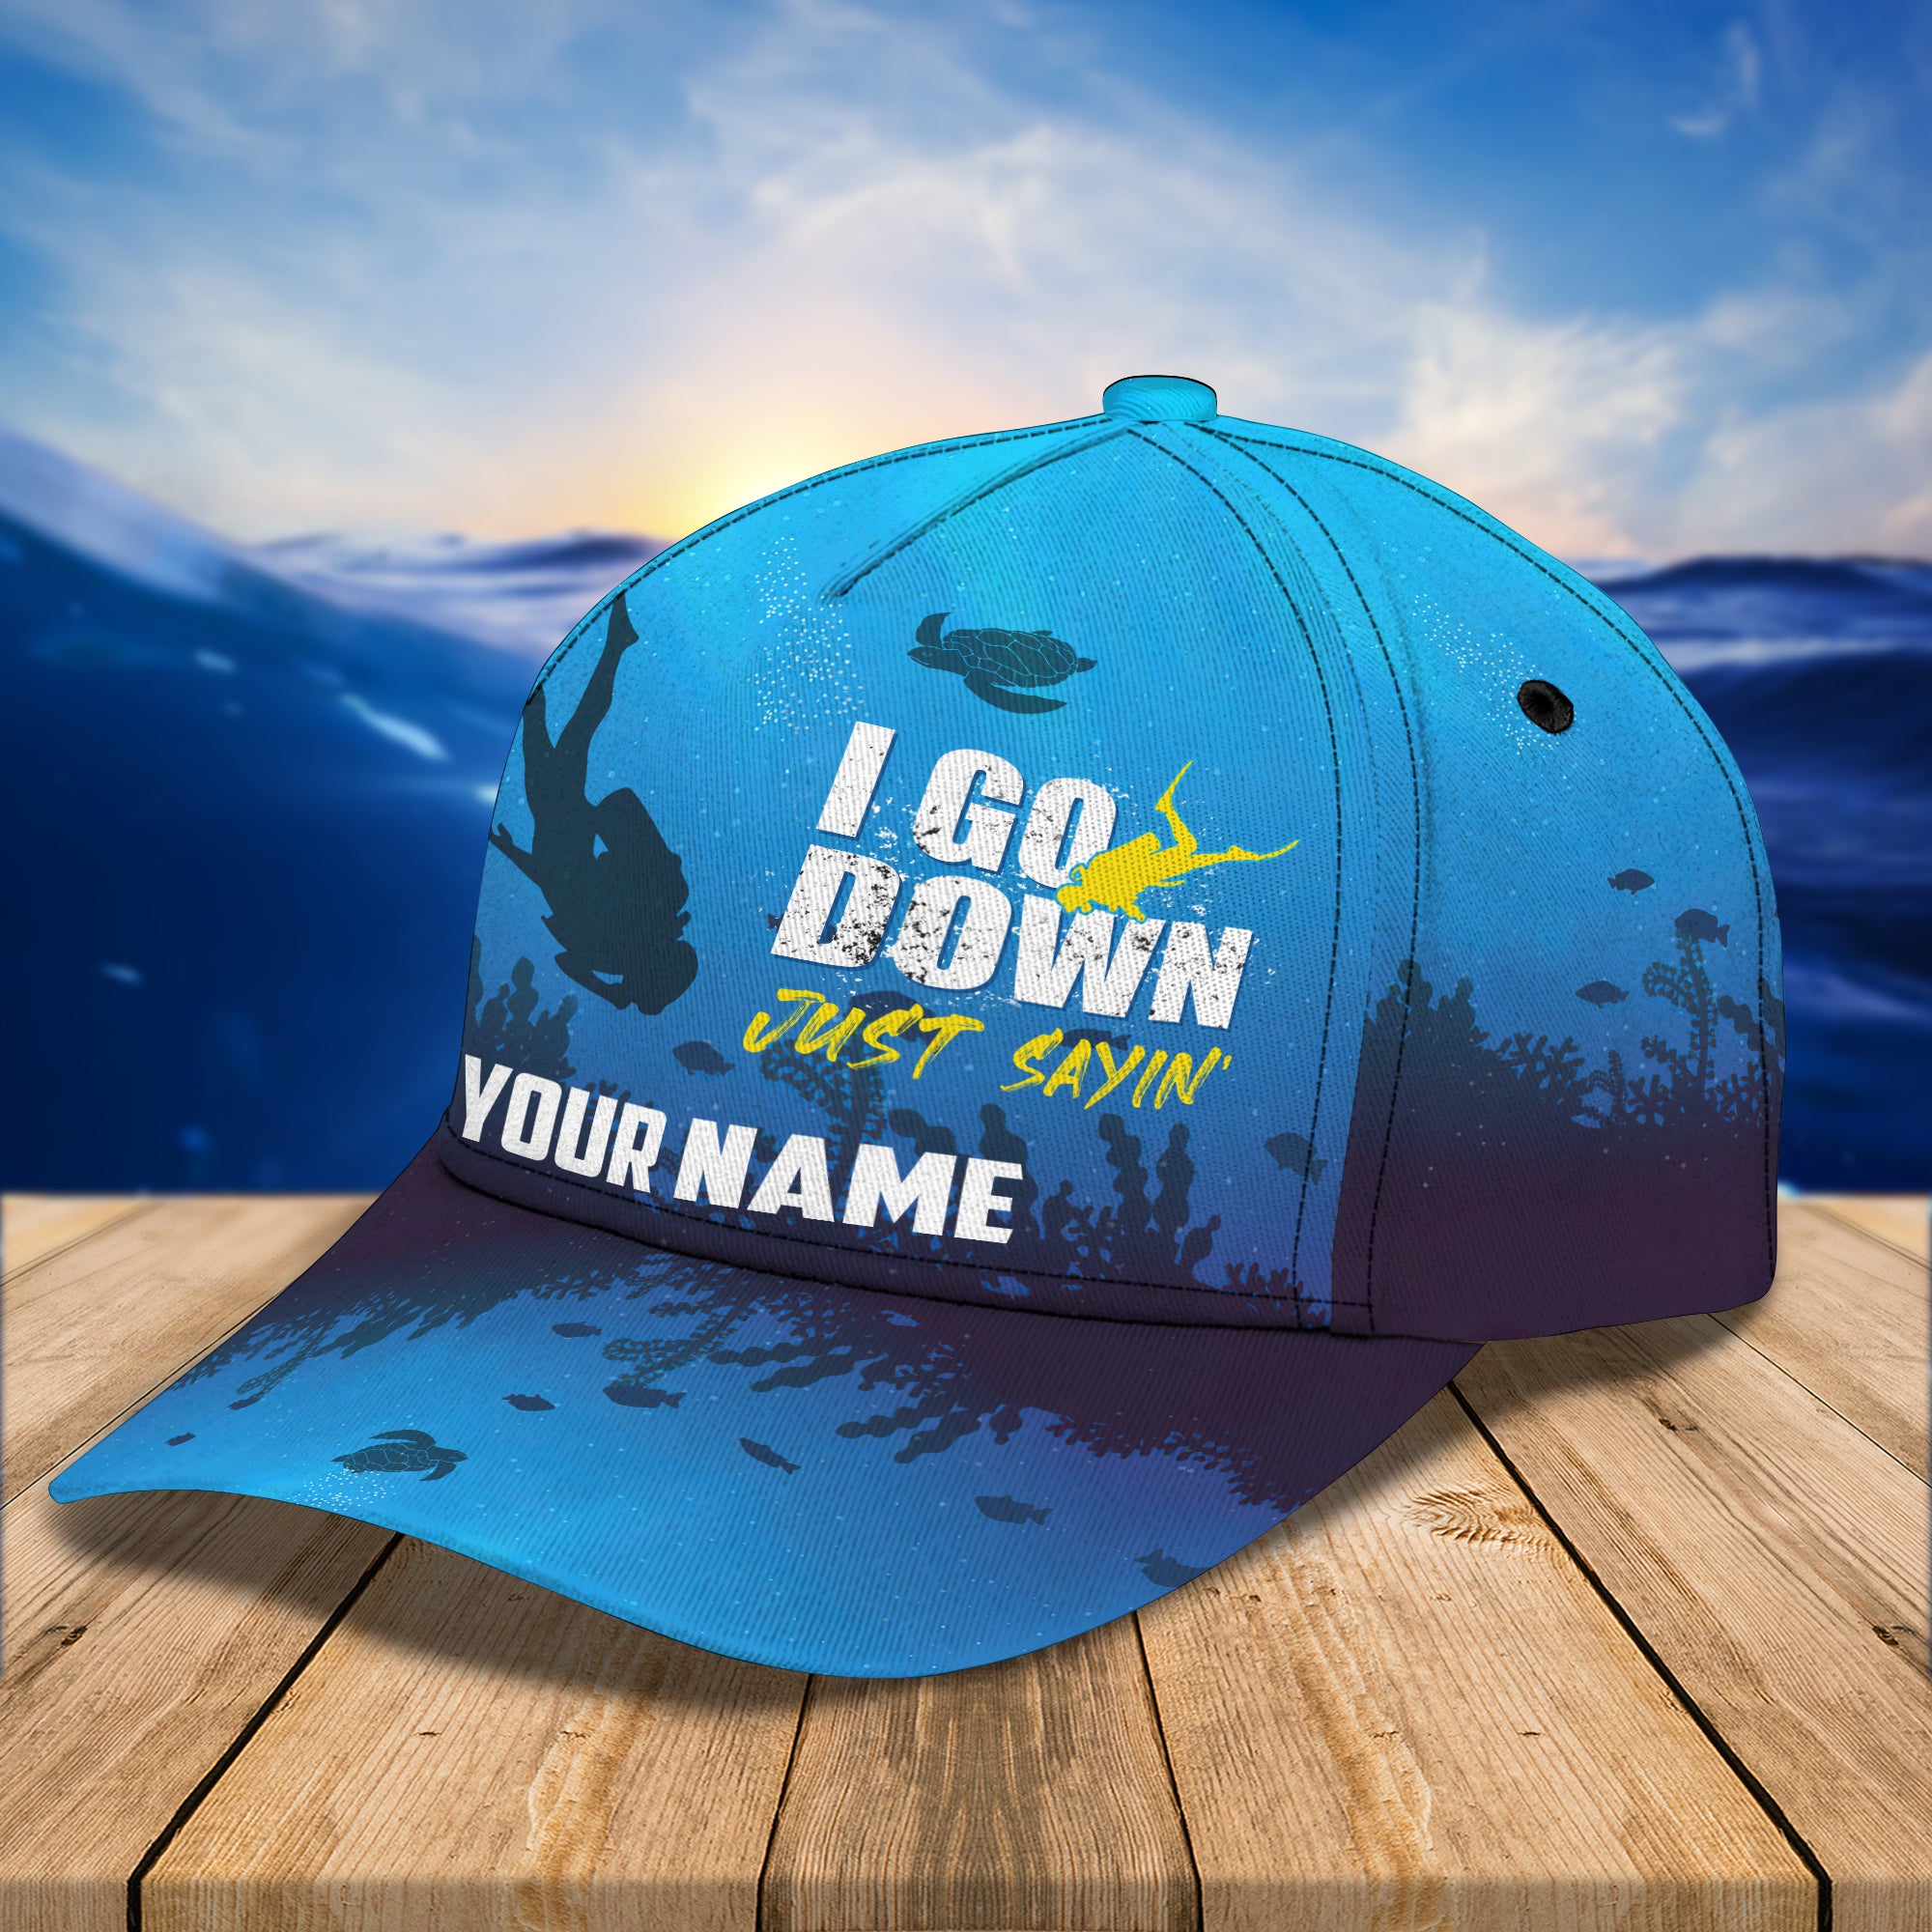 Scuba Diving I Go Down Just Saying - Personalized Name Cap 10 - Bhn97